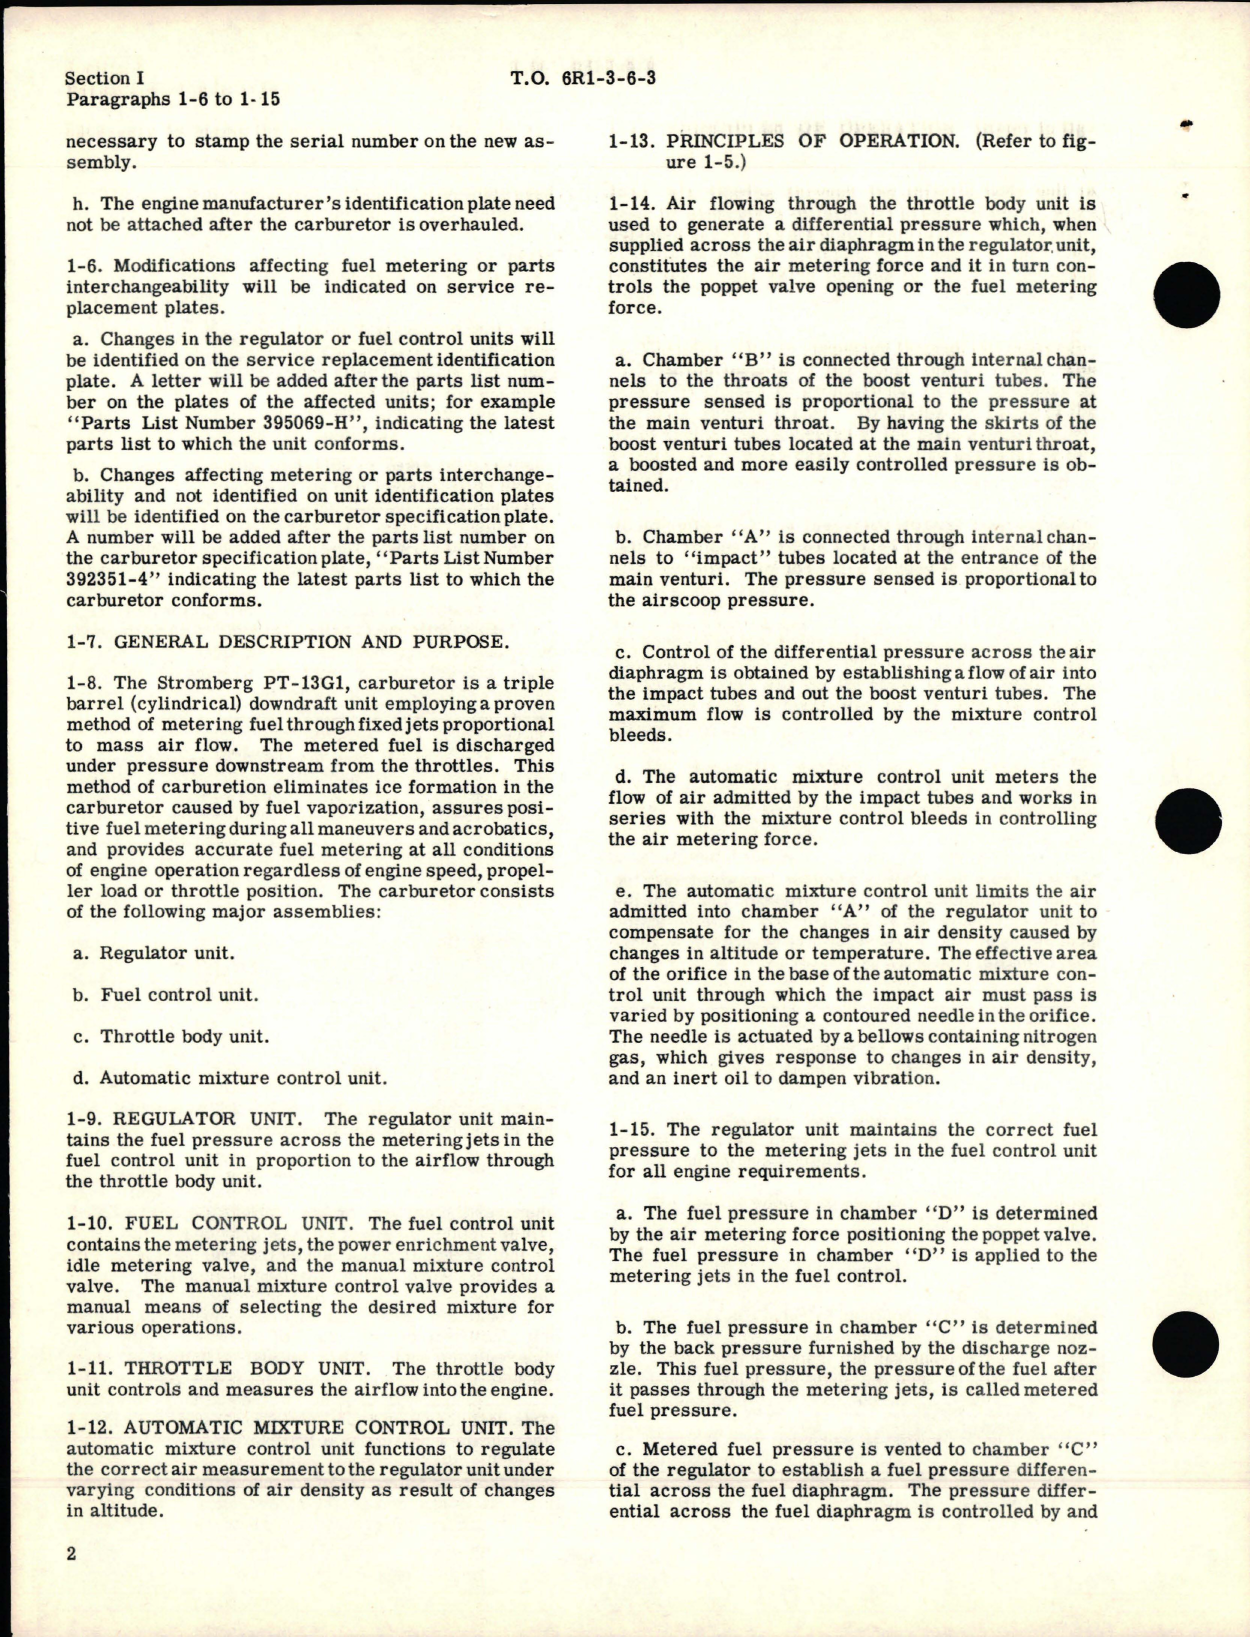 Sample page 8 from AirCorps Library document: Overhaul Instructions for Stromberg Injection Carburetor - Models PT-13G1, PT-3G5, PT-13G6, and PT-13D6